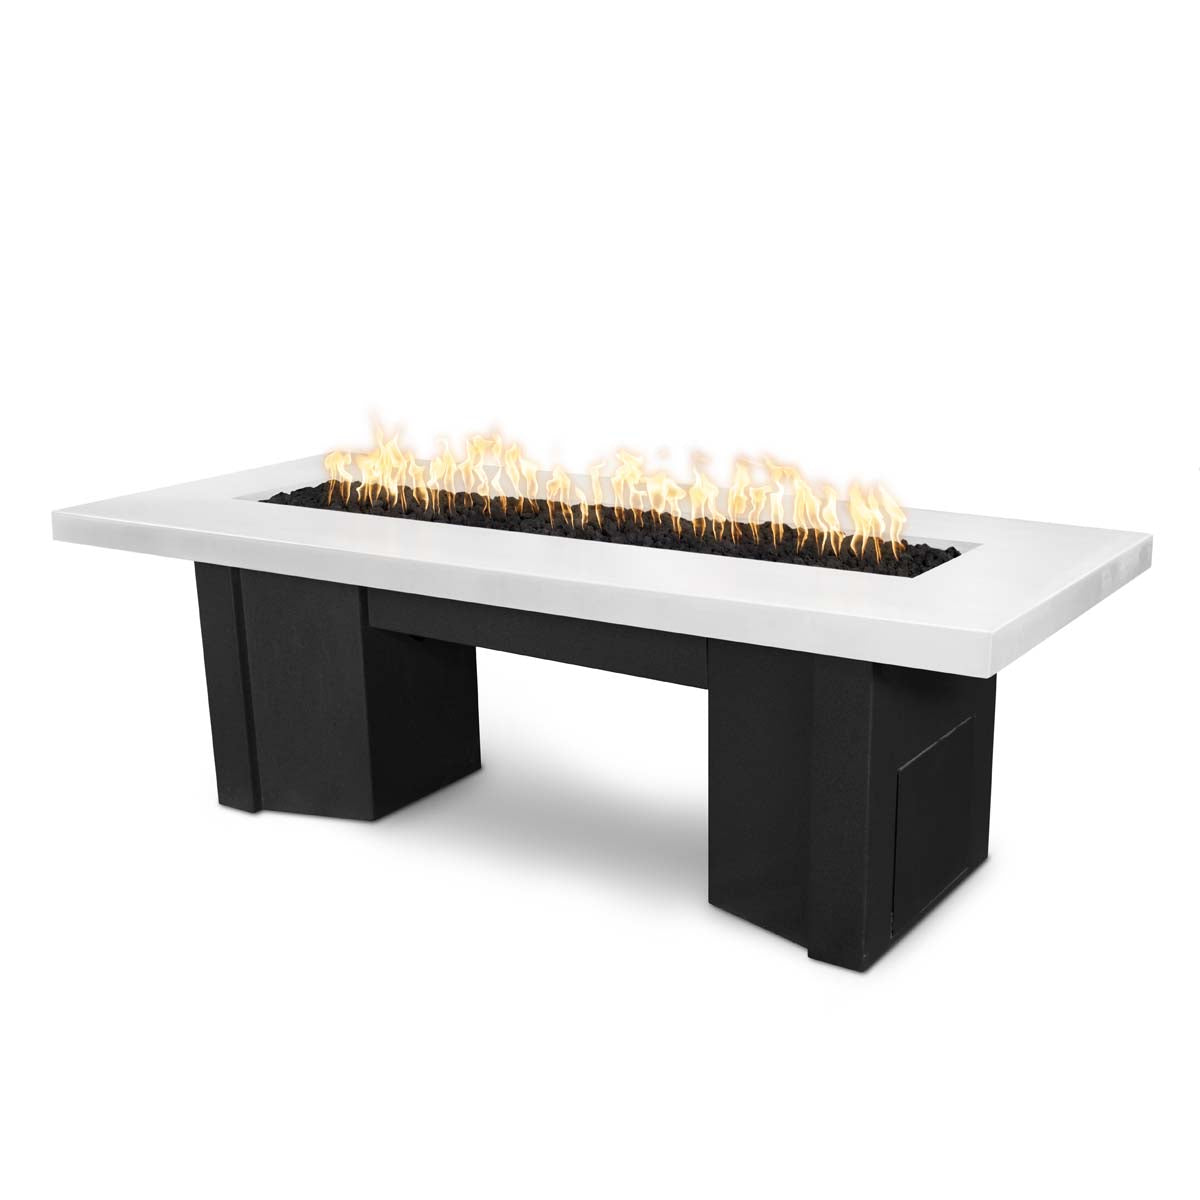 The Outdoor Plus Rectangular Alameda 78" Black & White Powder Coated Liquid Propane Fire Pit with Match Lit with Flame Sense Ignition